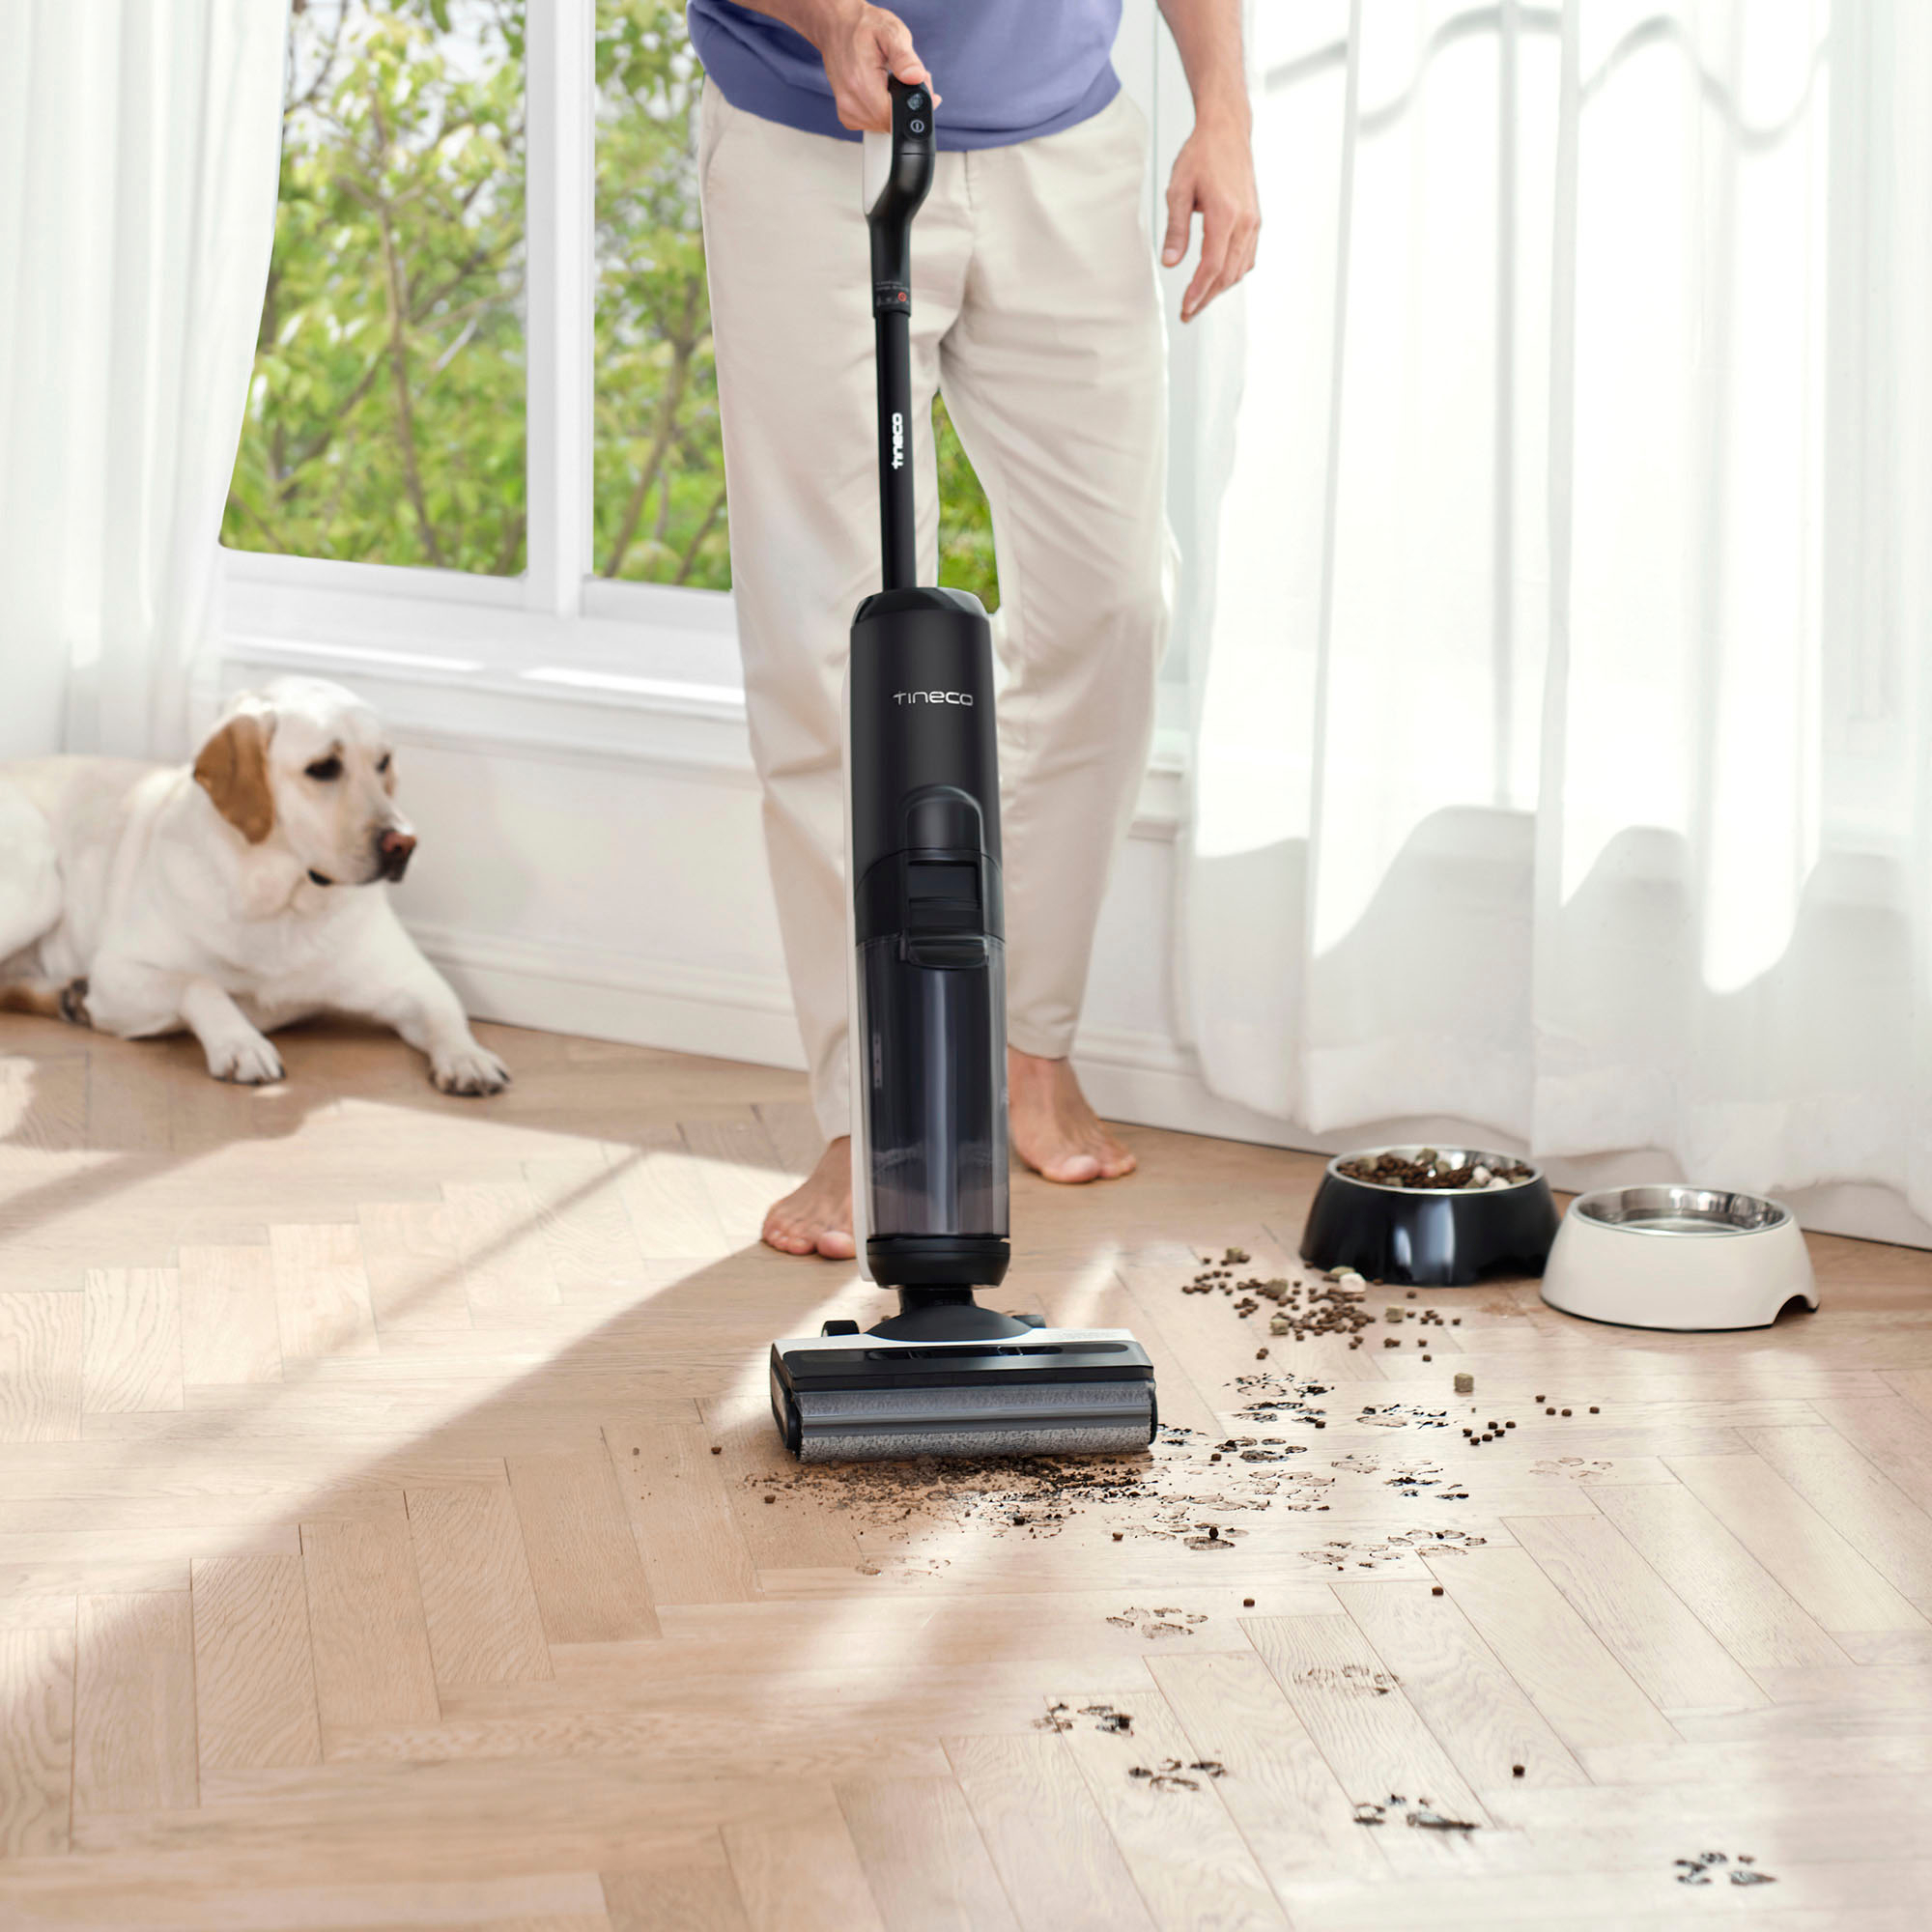  Tineco Floor ONE S6 Cordless Wet Dry Vacuum Floor Cleaner  Washer Mop All-in-One for Hard Floors, LED Display, Long Runtime,  Dual-Sided Edge Cleaning, Self-Cleaning : Tools & Home Improvement